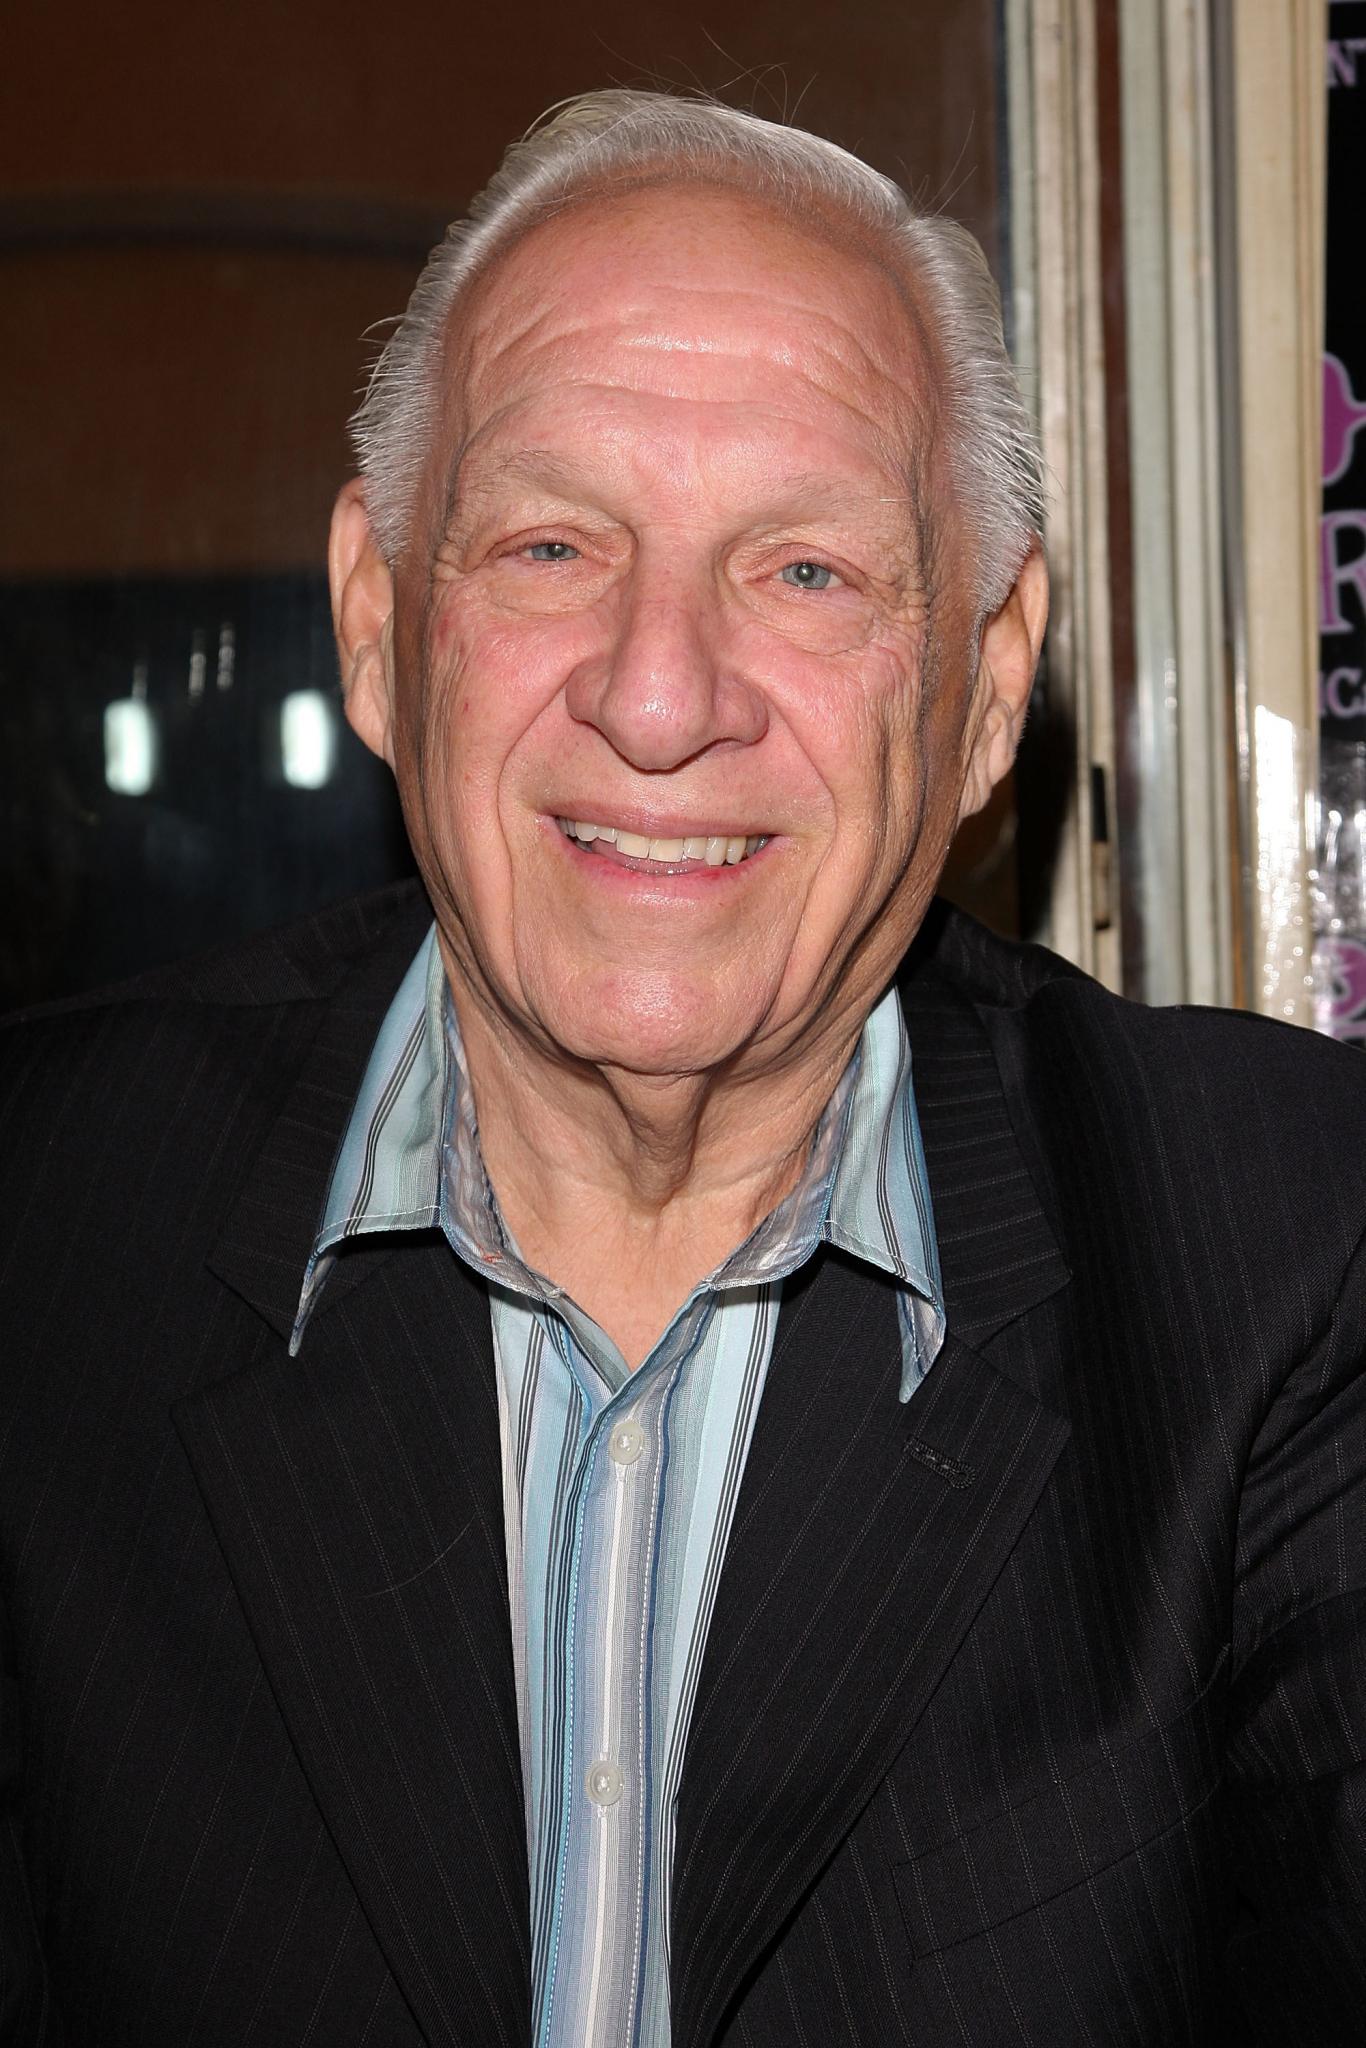 Former N.W.A. Manager Jerry Heller Files Lawsuit Against 'Straight Outta Compton' Producers